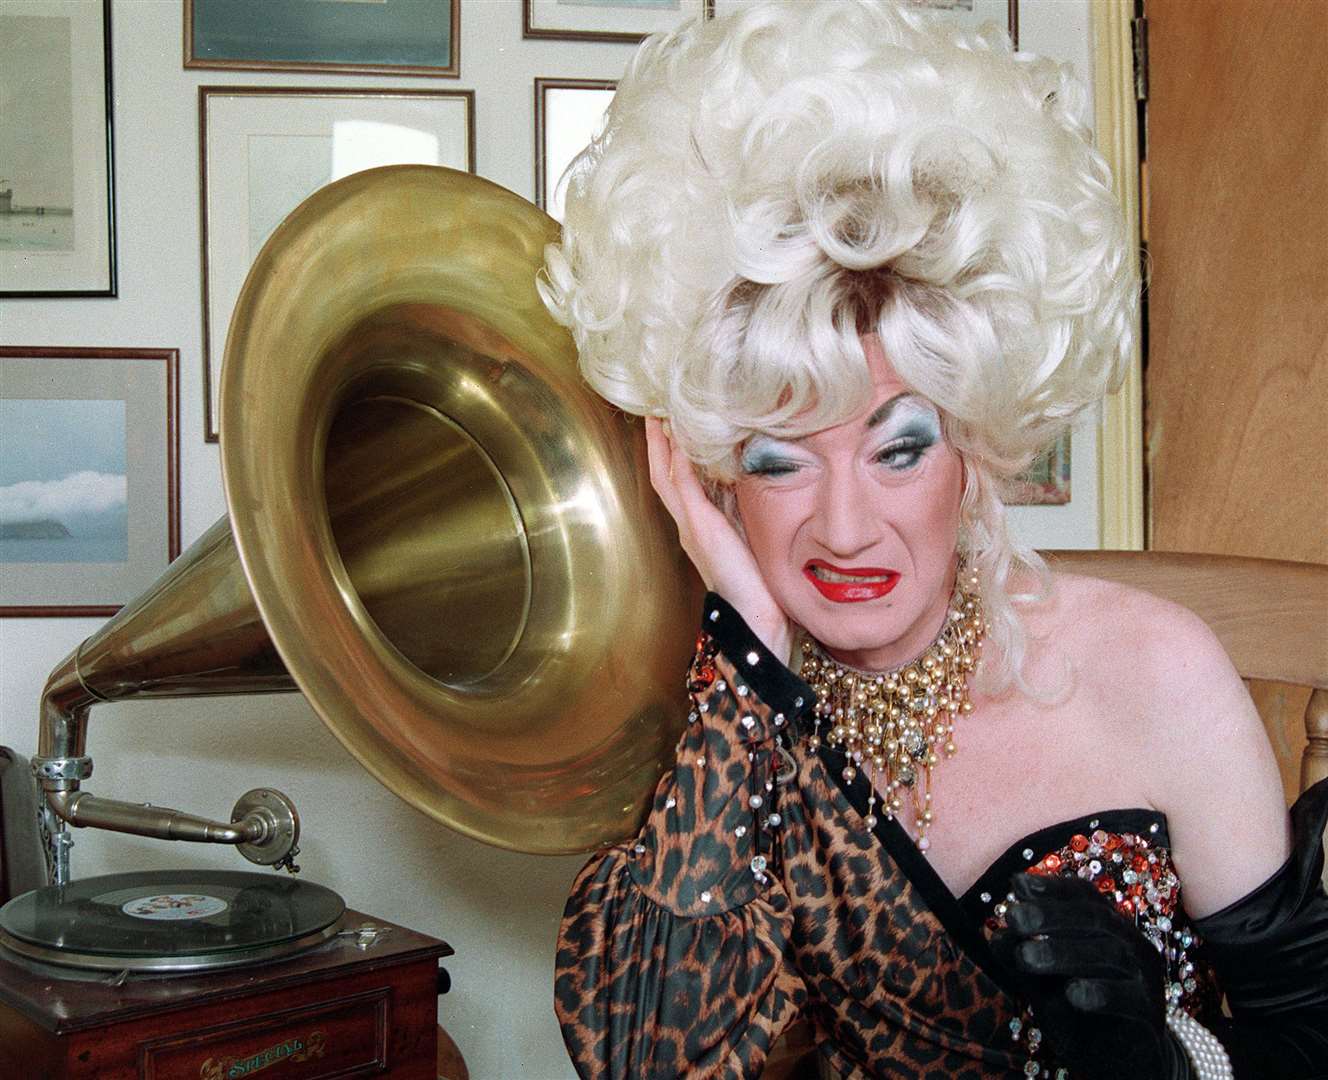 Paul O’Grady rose to fame as his alter ego Lily Savage (Tony Harris/PA)